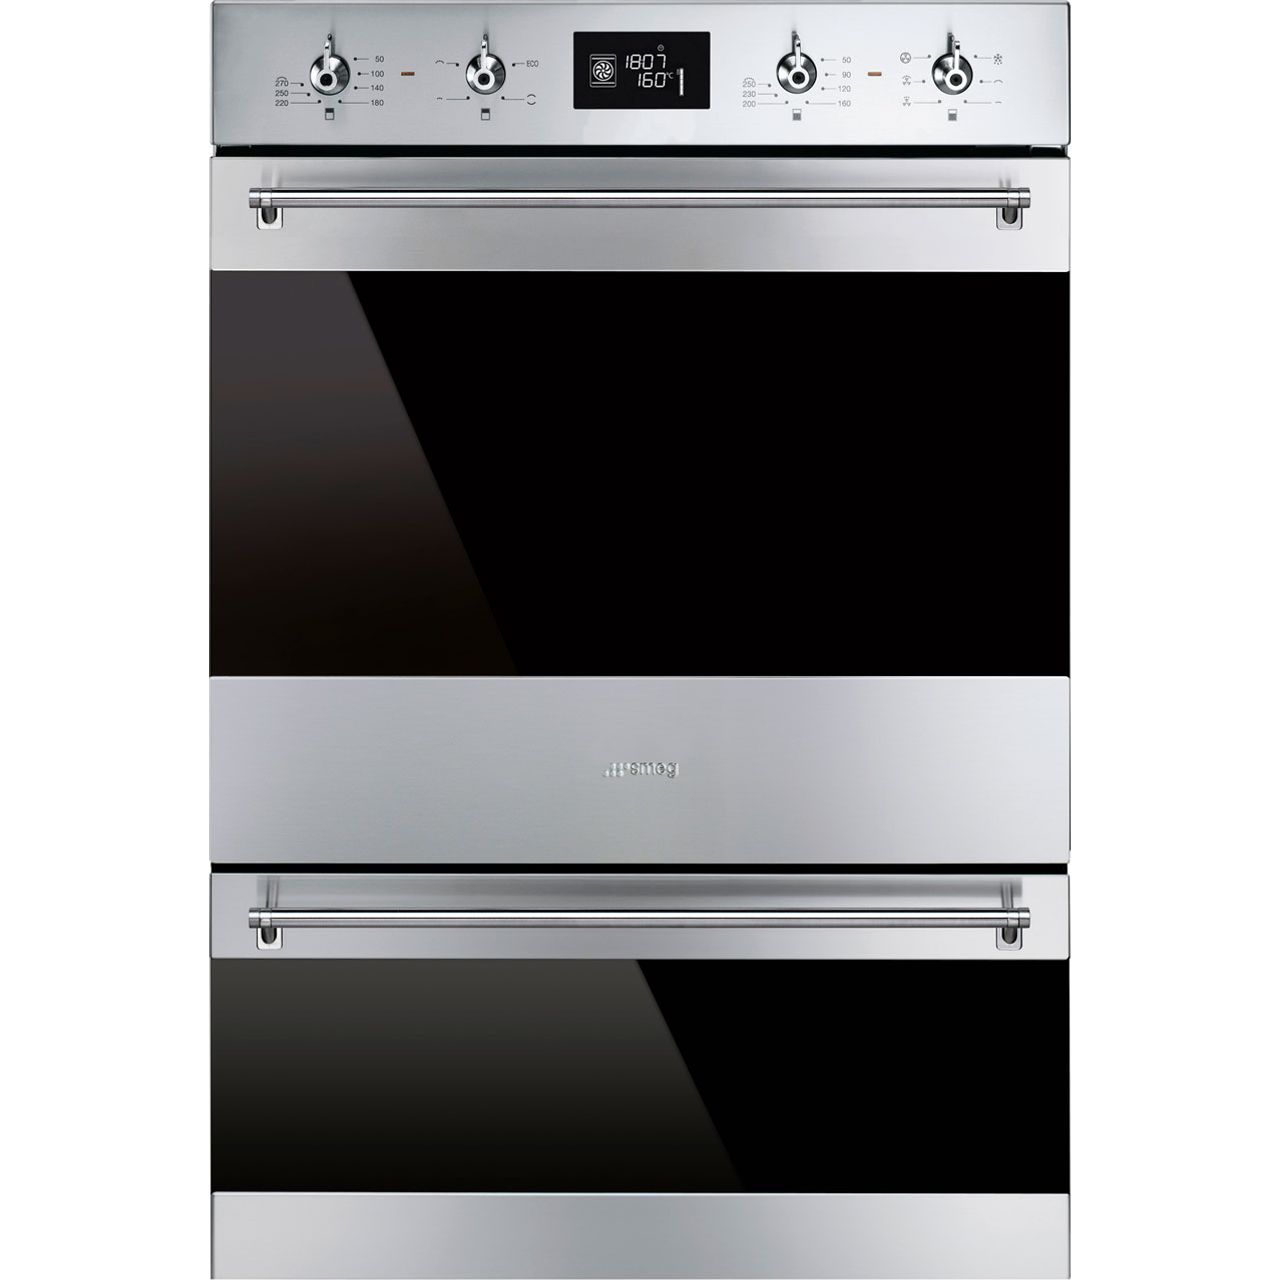 Smeg Classic DOSP6390X Built In Double Oven Review